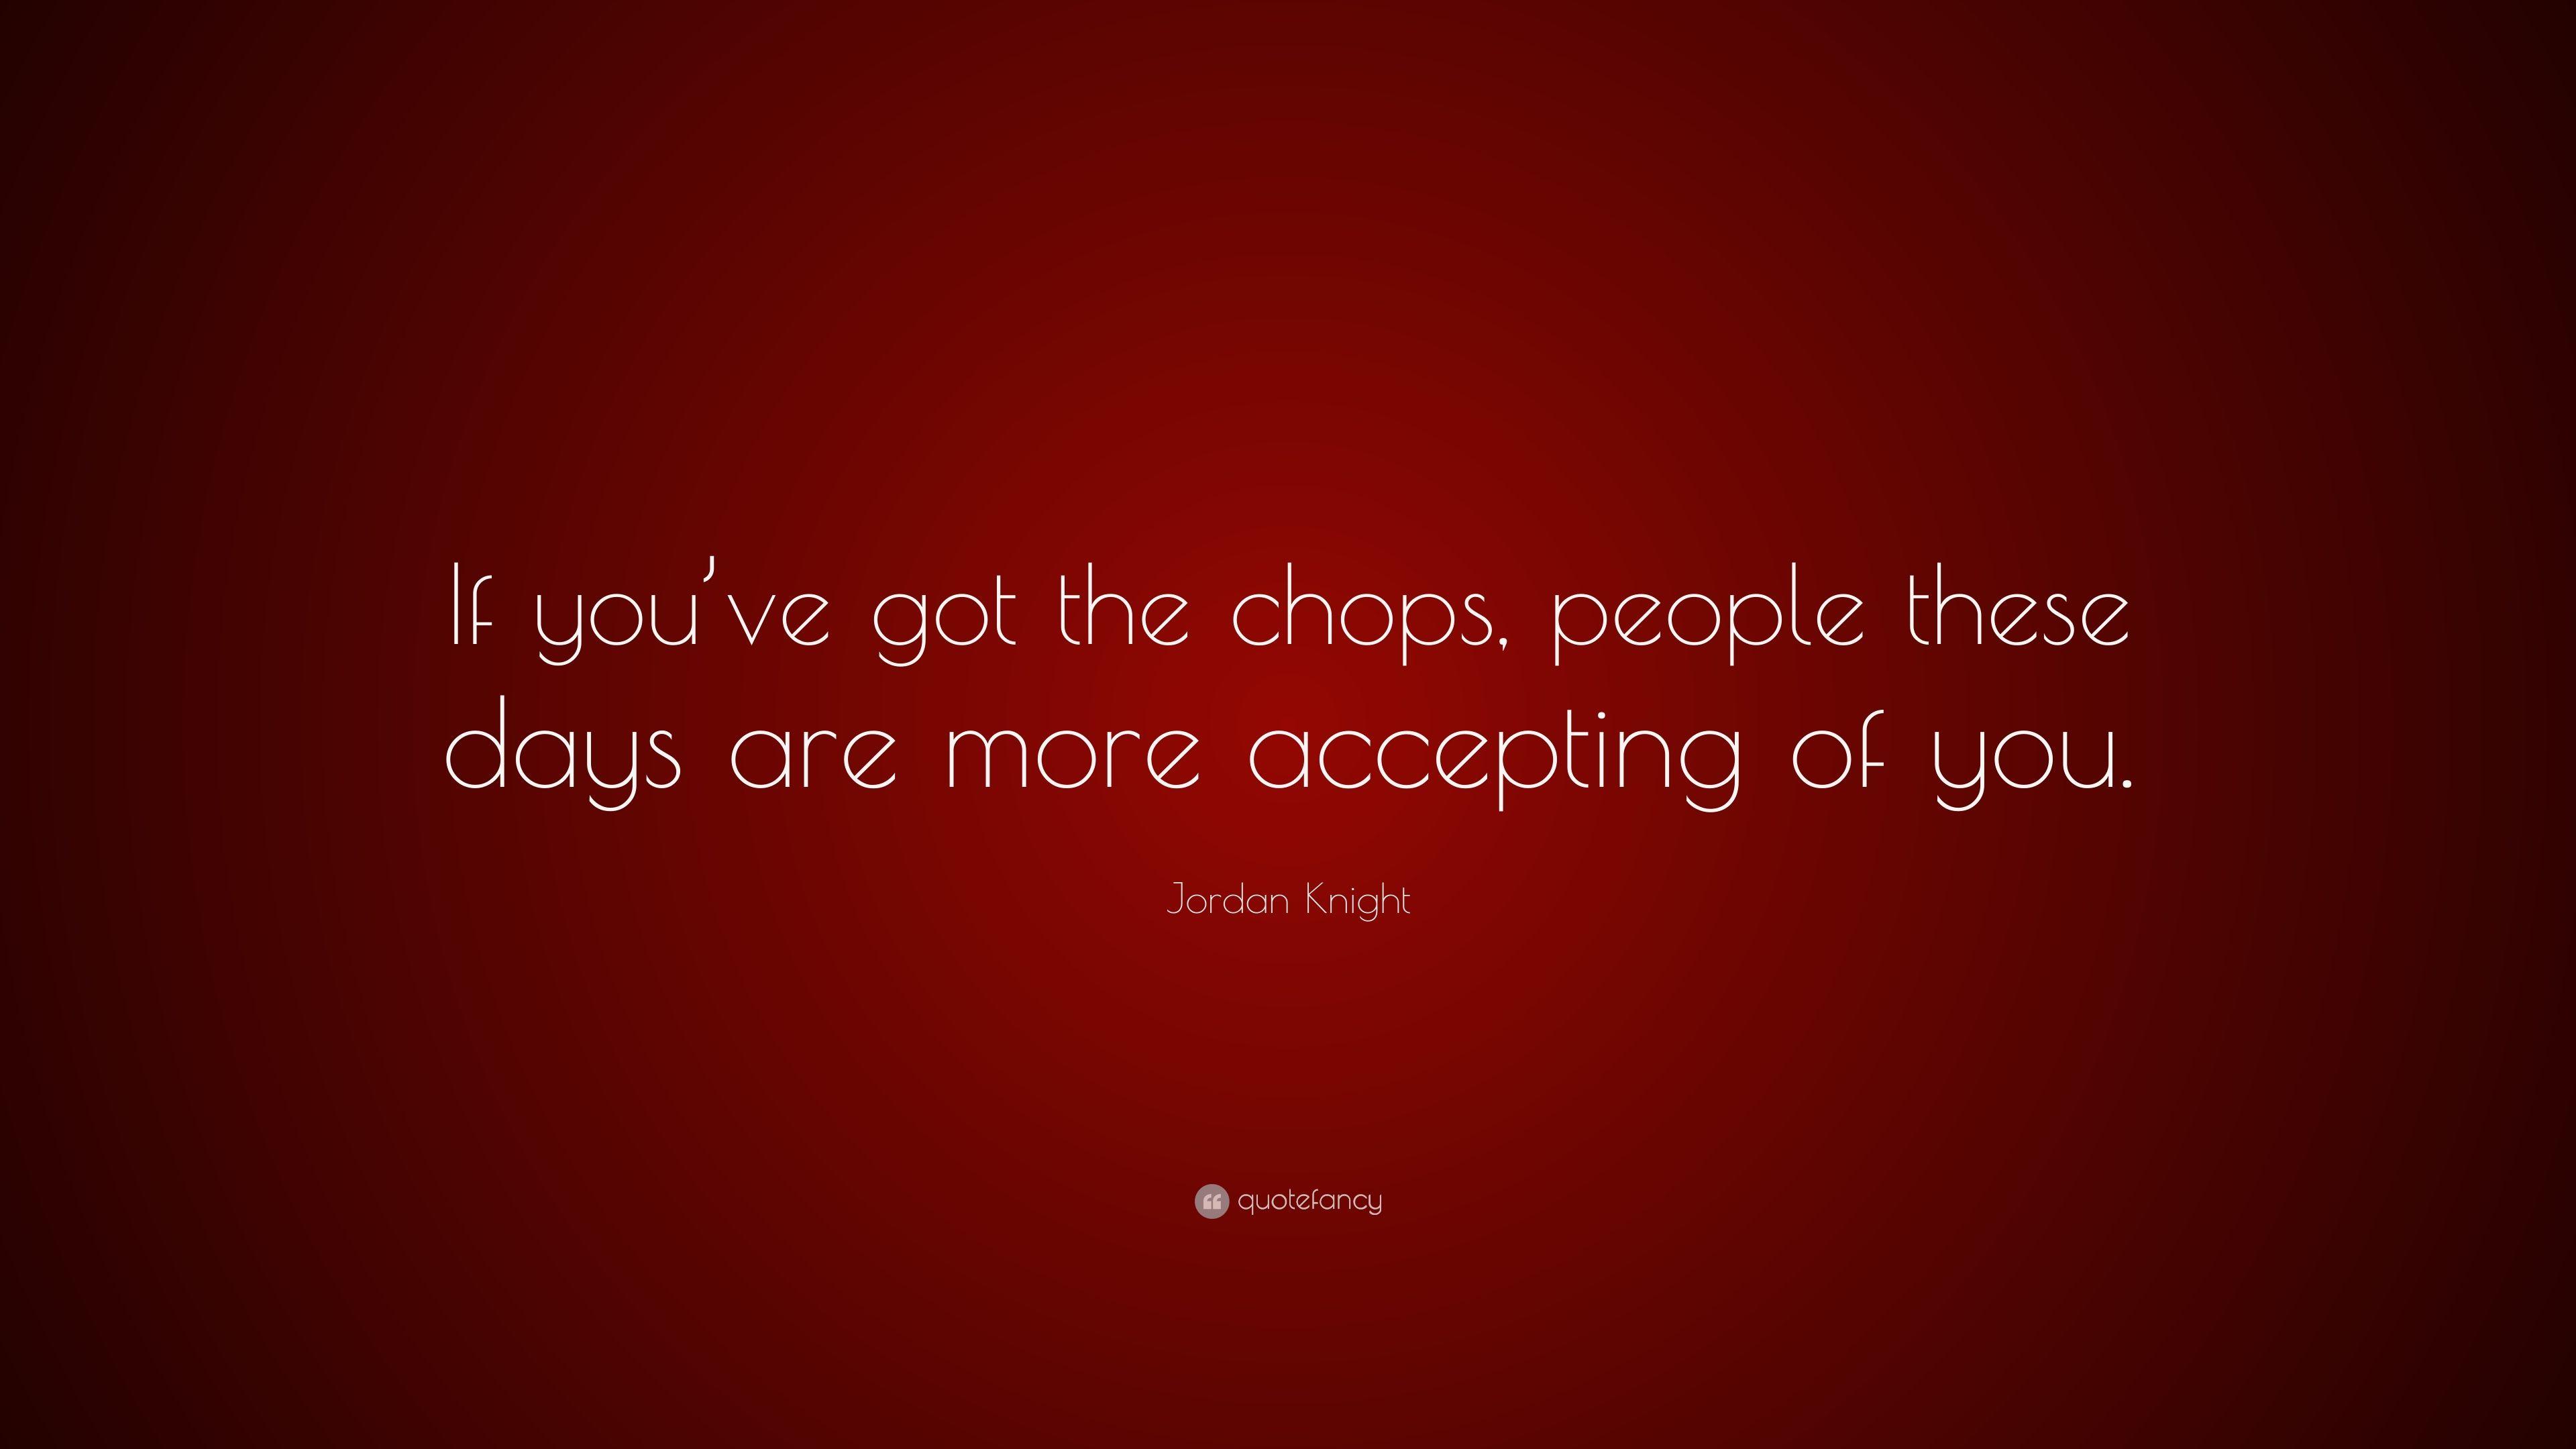 Jordan Knight Quote: “If you've got the chops, people these days are